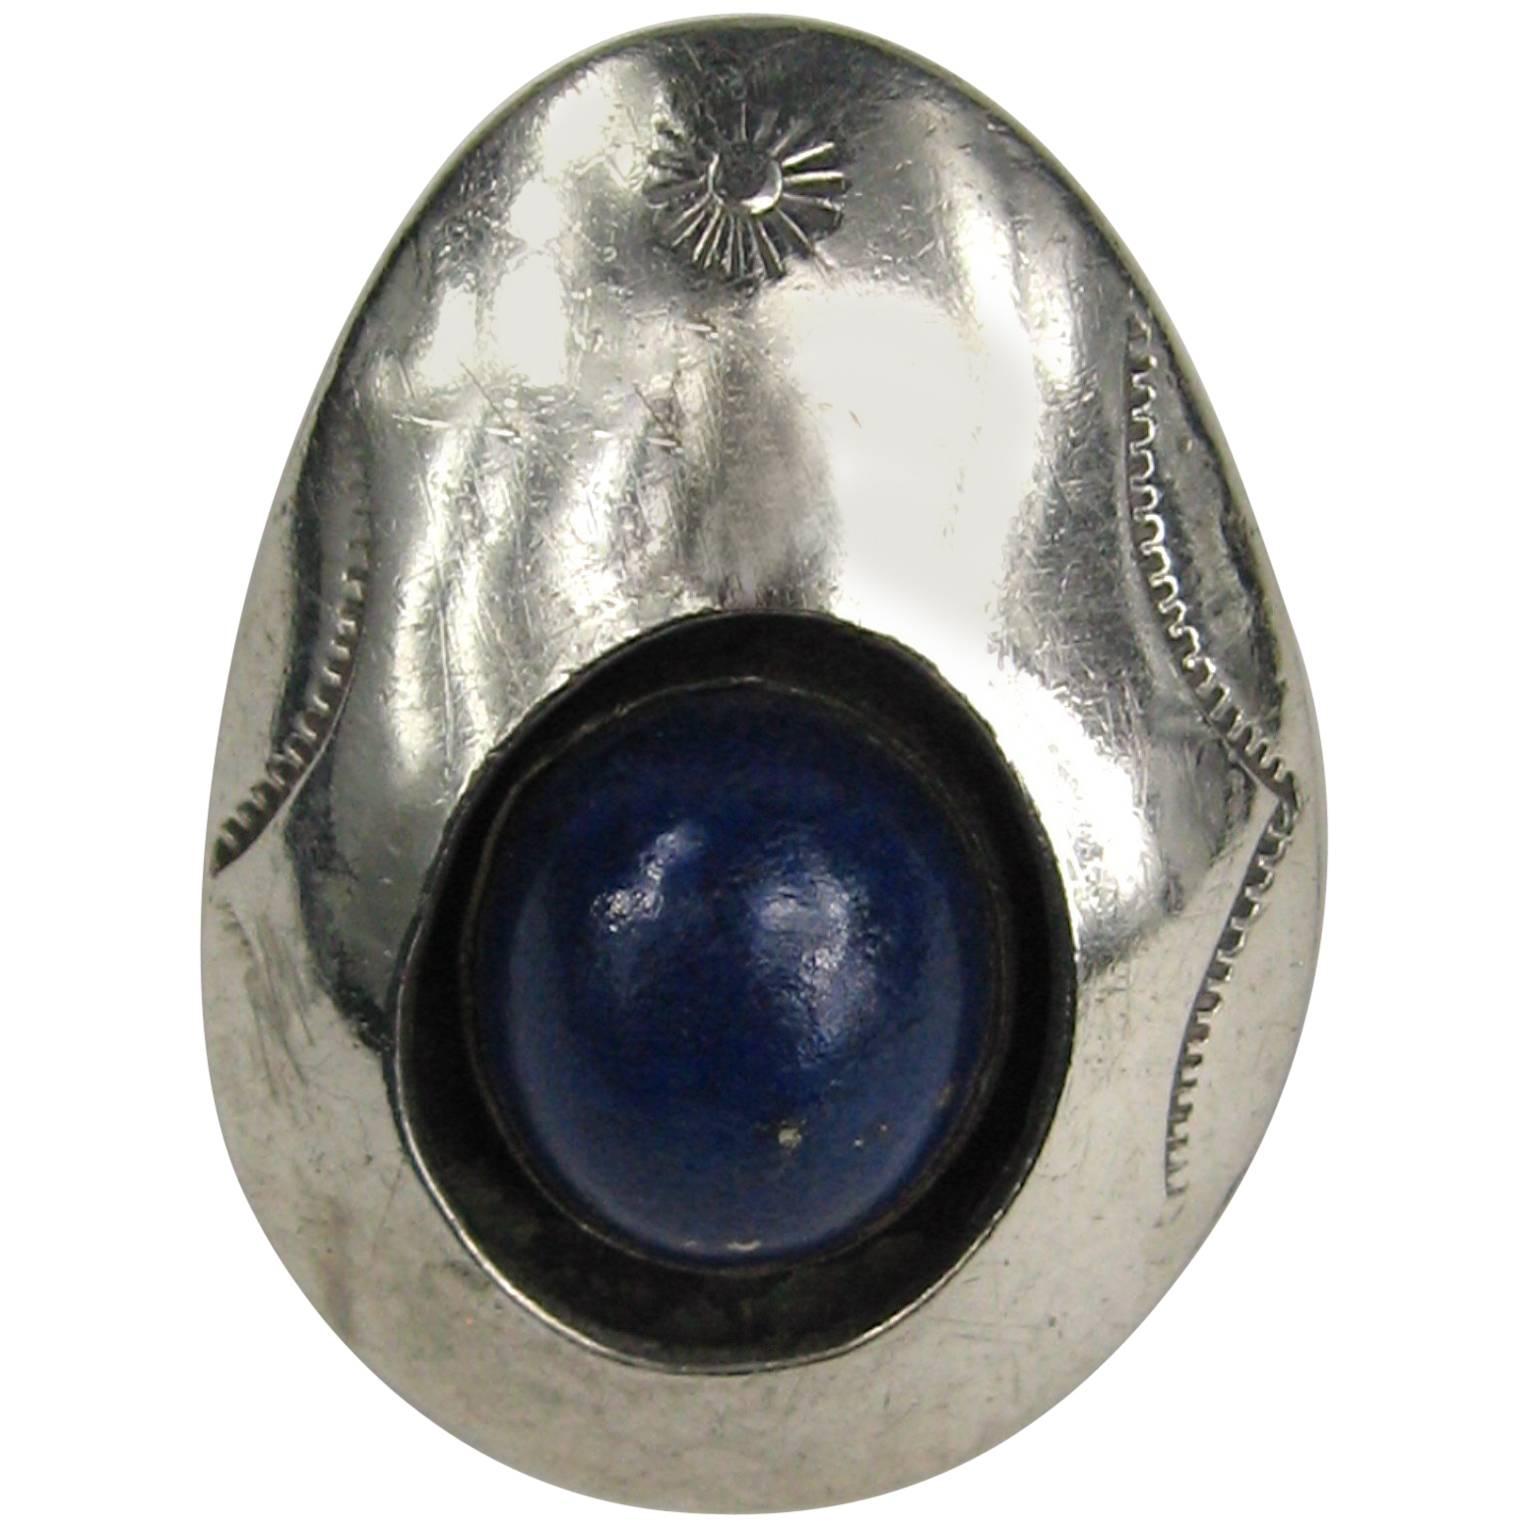 This is an amazing piece of Navajo Jewelry!  Lapis lazuli Shadow Box Sterling silver Ring.  Large Lapis stone inset in a shadow box of sterling  Matching earrings and squash blossom  necklace are listed as well on our storefront. Ring is a 5.25 top